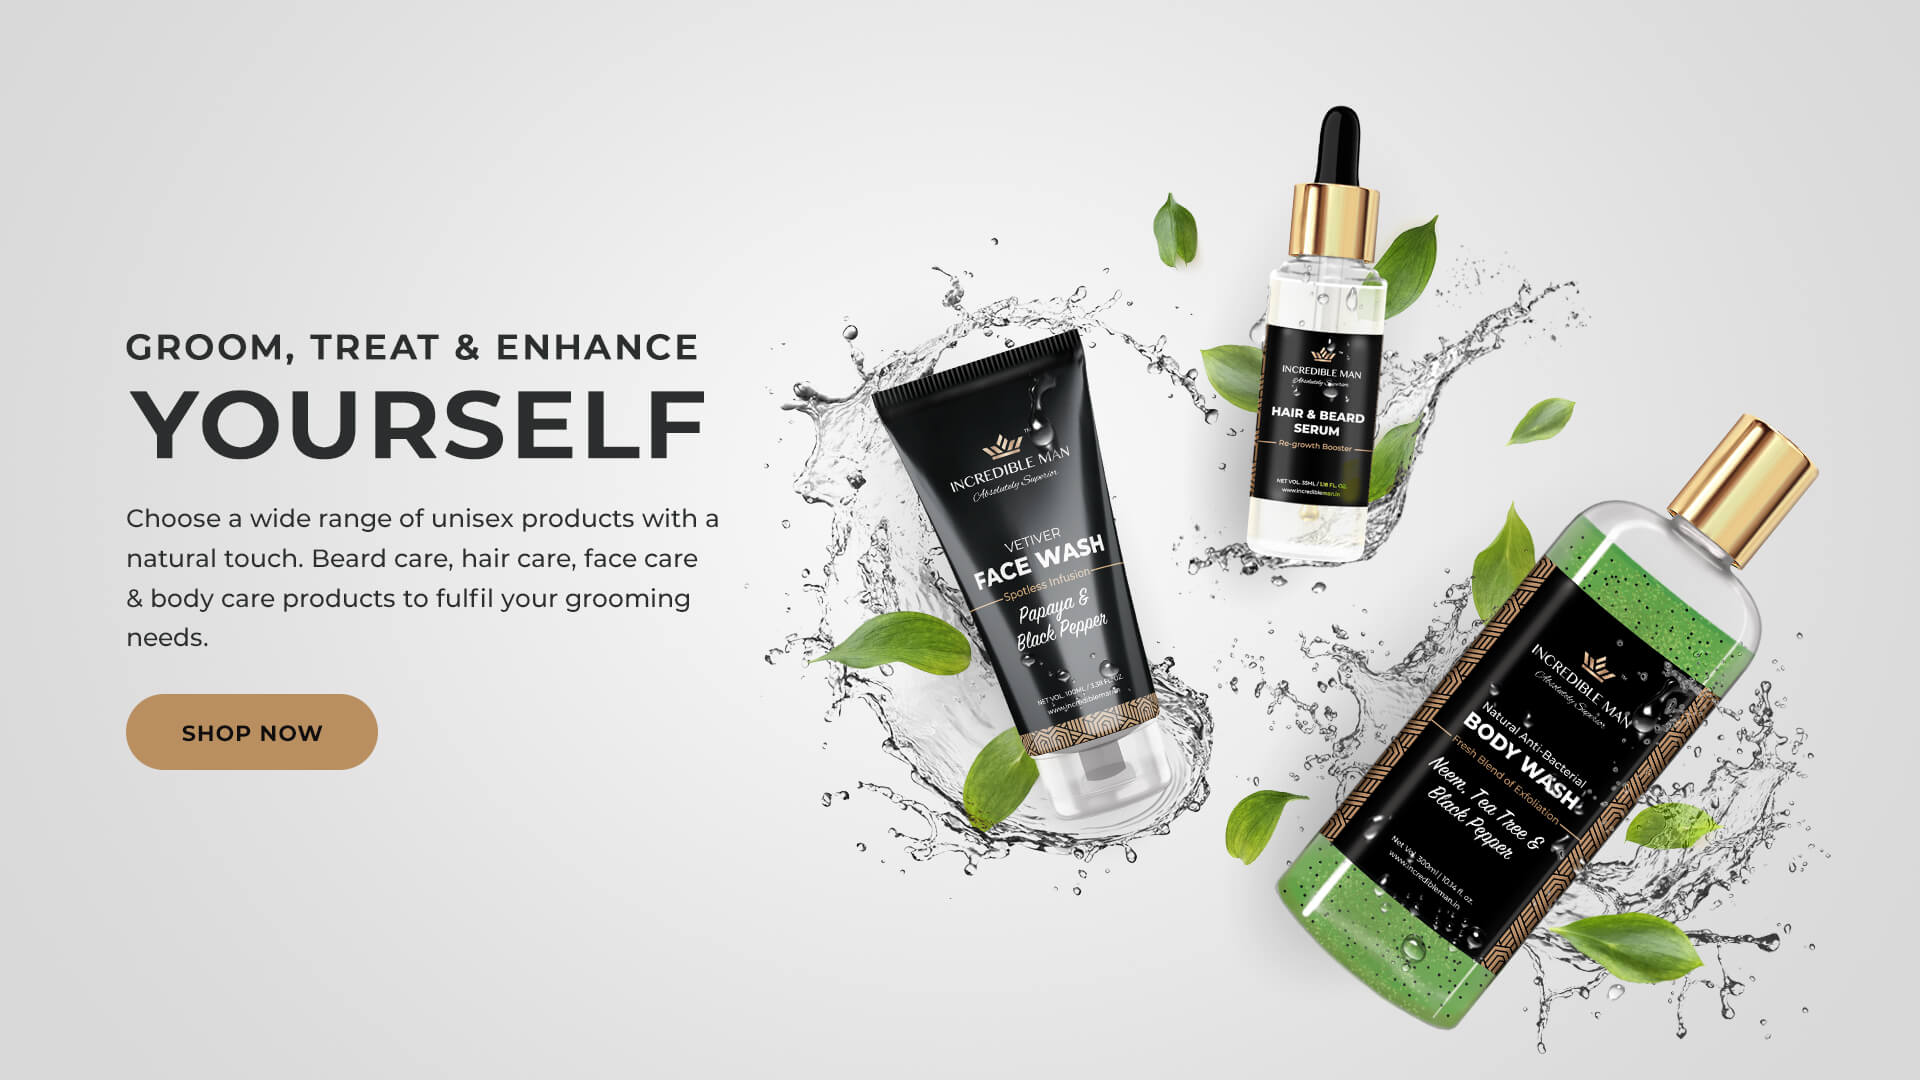 Groom, Treat & Enhance Yourself - Remove Dirt, Oil & Detoxify your skin with vetiver face wash, hair & Beard Serum and Body Wash